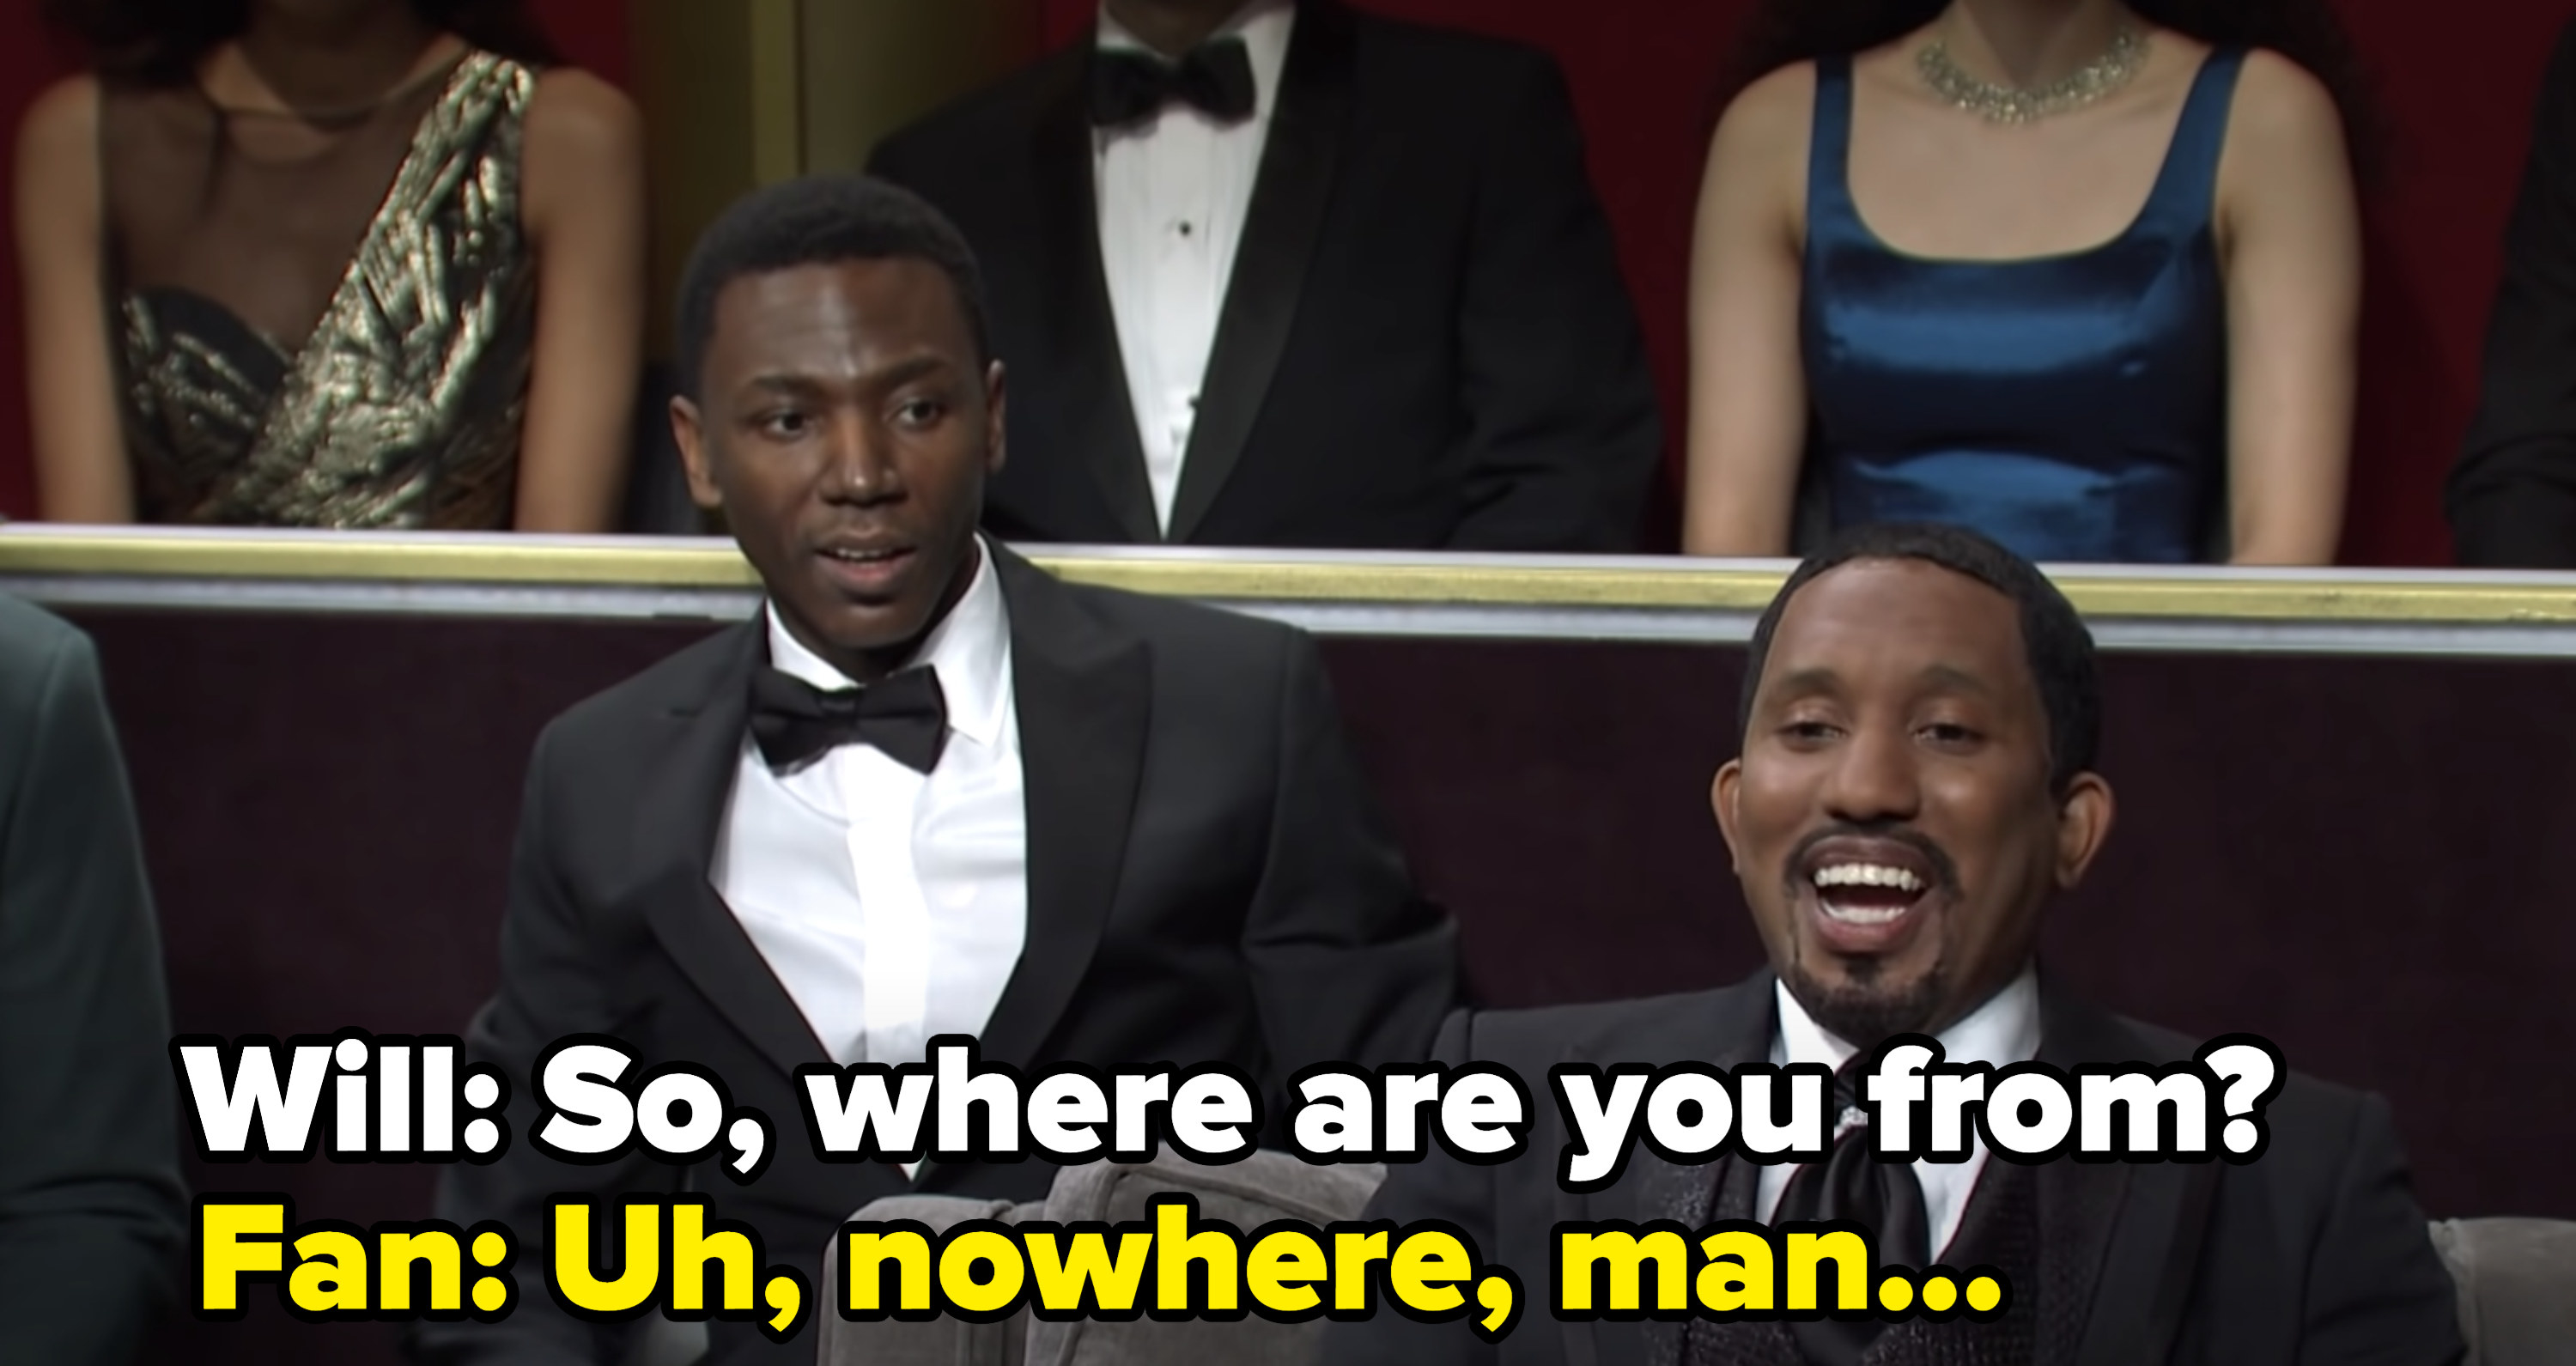 Chris Redd spoofing Will Smith on SNL